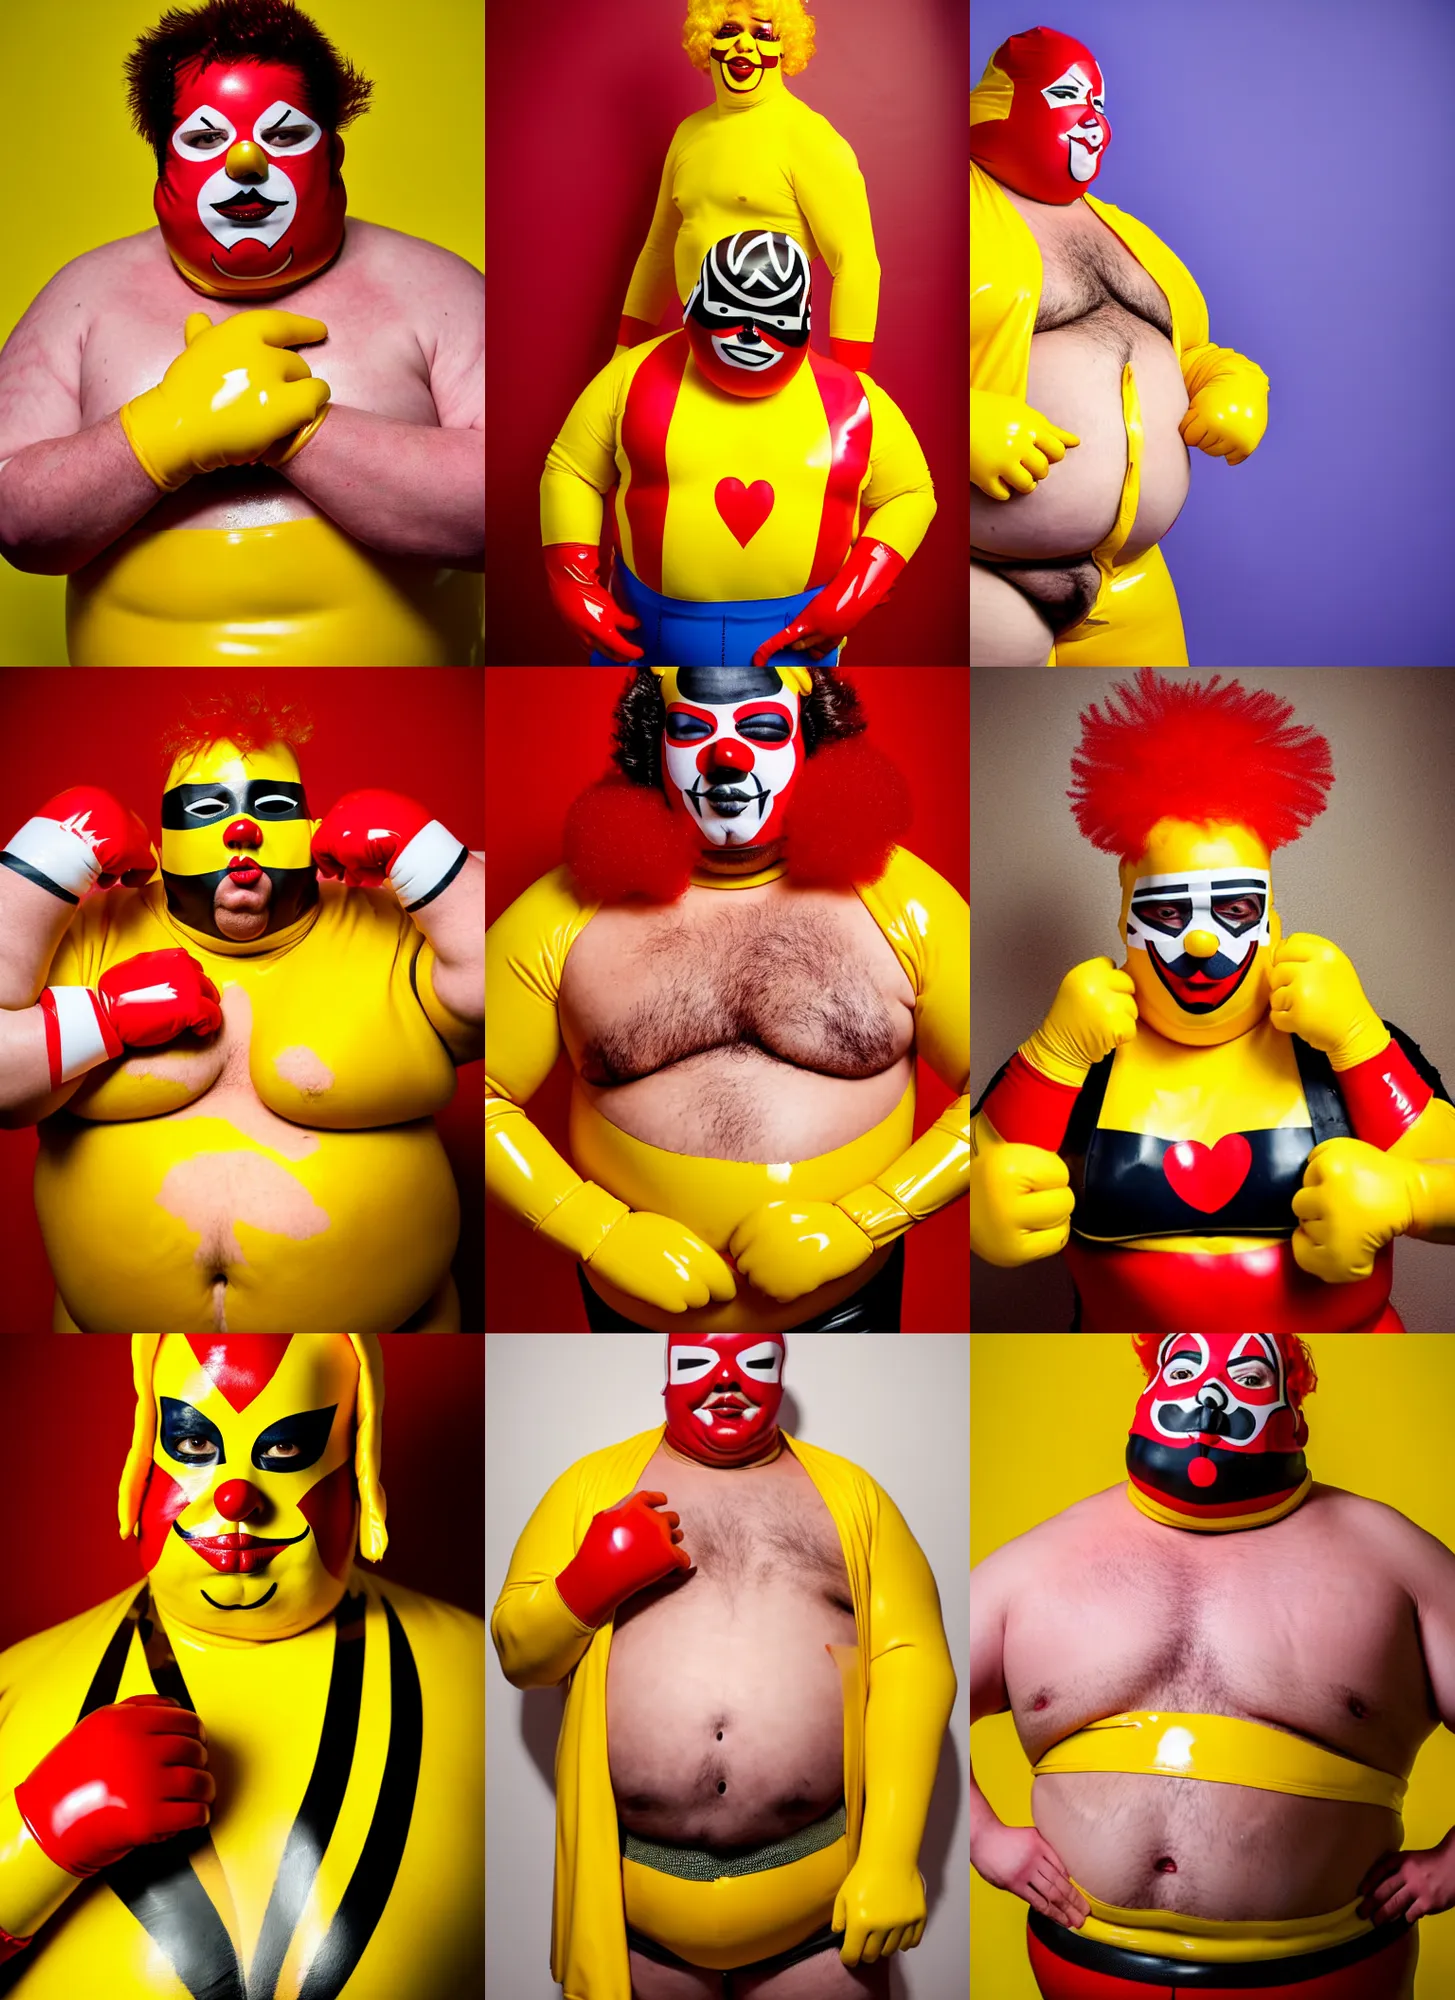 Prompt: portrait of a very chubby looking Lucha libre dressed in yellow and red Ronald McDonald rubber latex costume with red and white color latex sleeves and yellow latex gloves, hamburger tattoo on bare hairy chest, red Ronald McDonald hair, photography inspired by Oleg Vdovenko